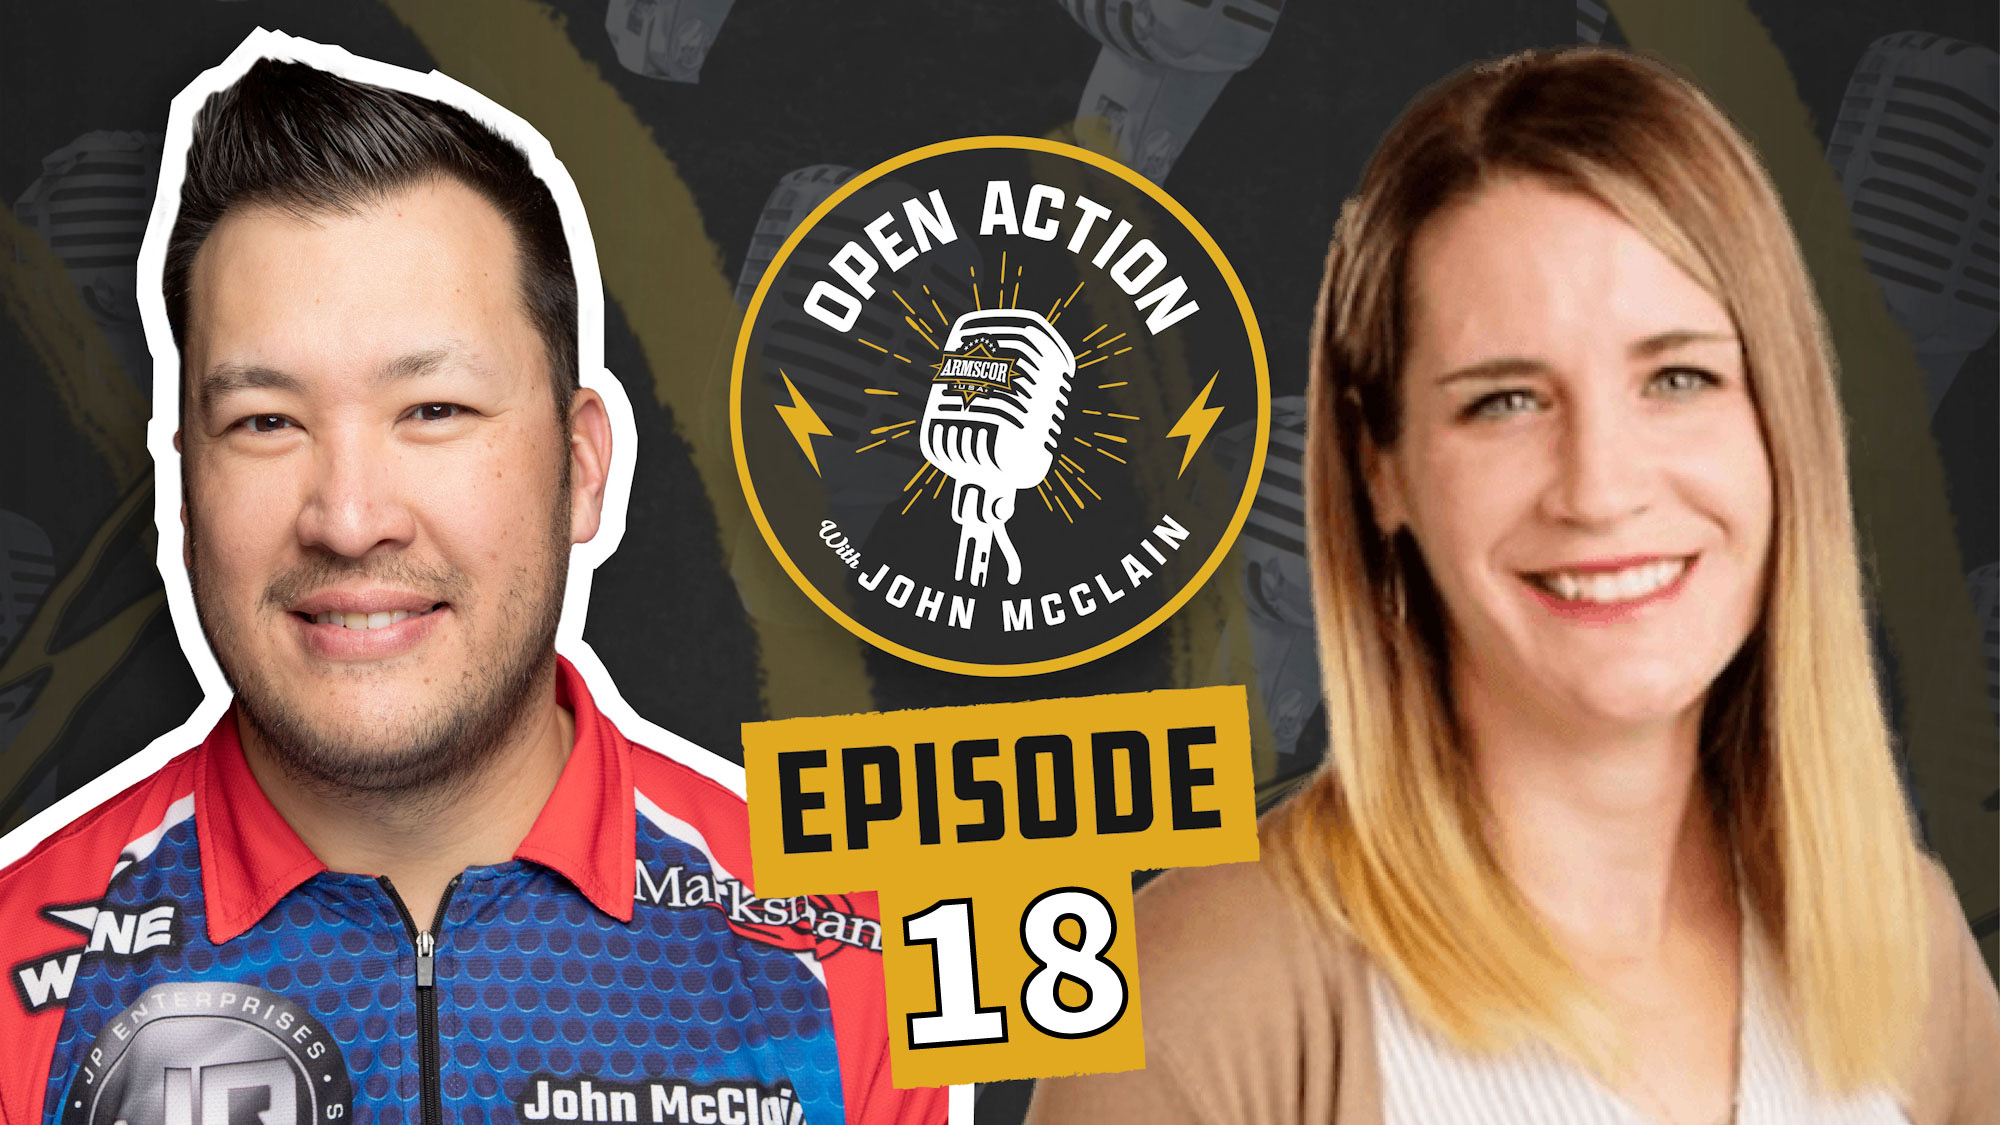 Armscor Open Action Podcast with John McClain & guest Heather Covrig